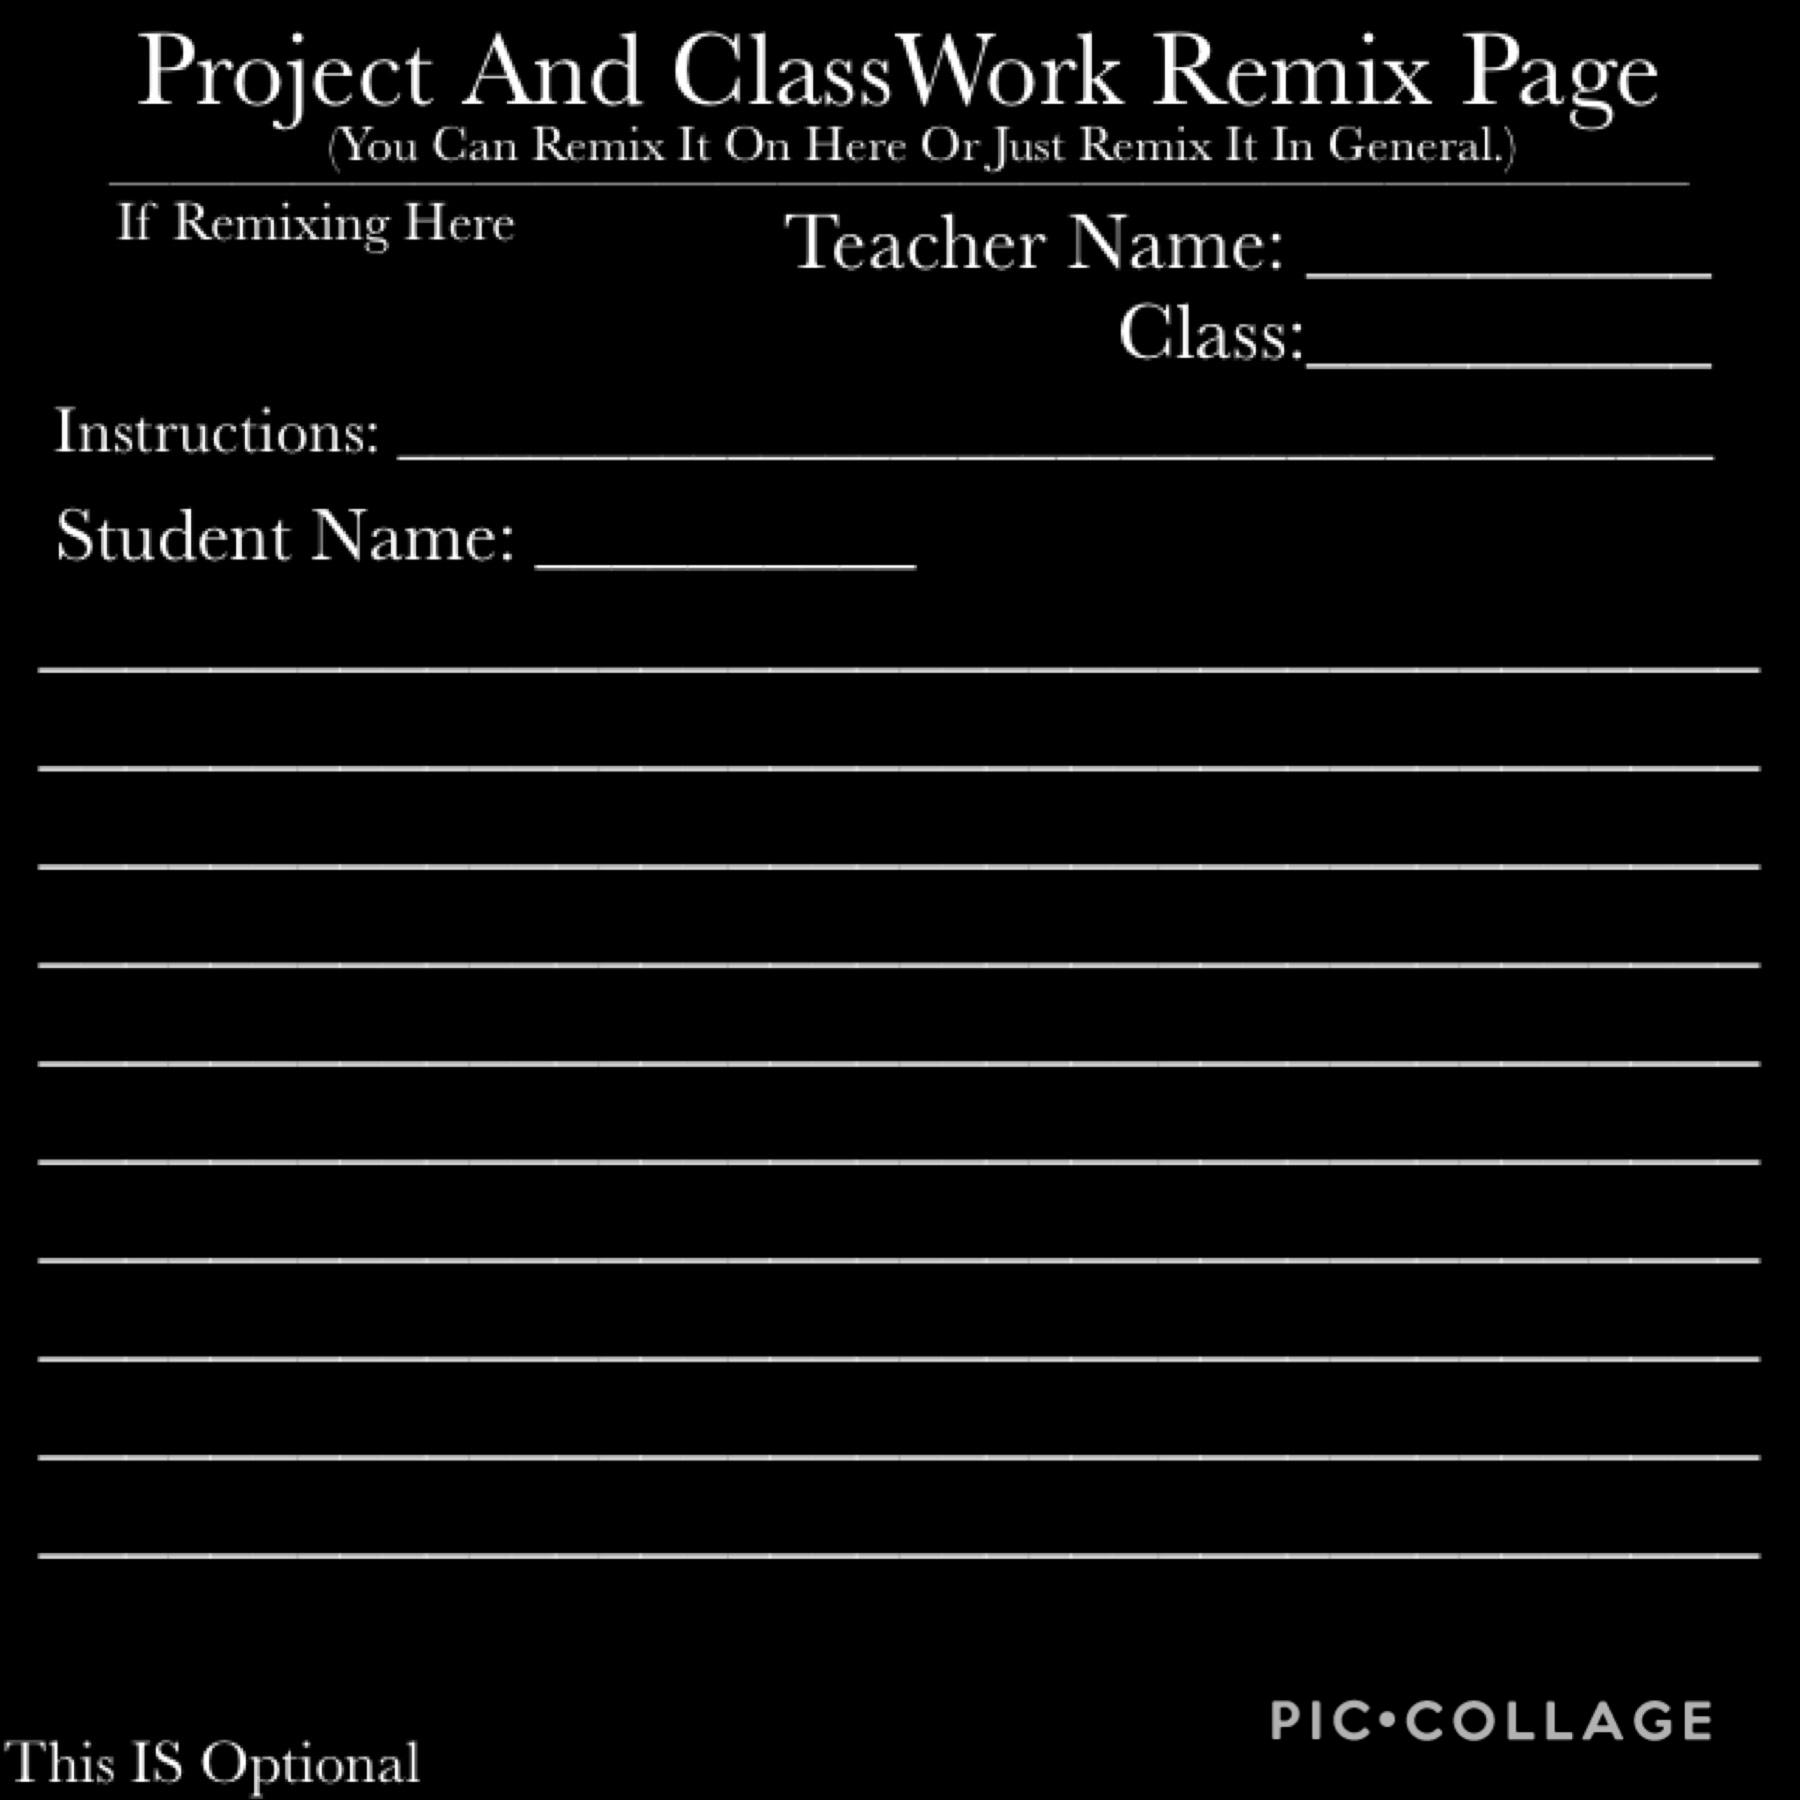 This Is For Any Projects or Class Things. If You Need To Make Stuff Up Come Here. All Projects Can Be Found Here or In Chat Pages. Teachers Can Remix Work Plans. Student Can Remix Your Work. Teachers Can Then Remix or Comment the Grades 